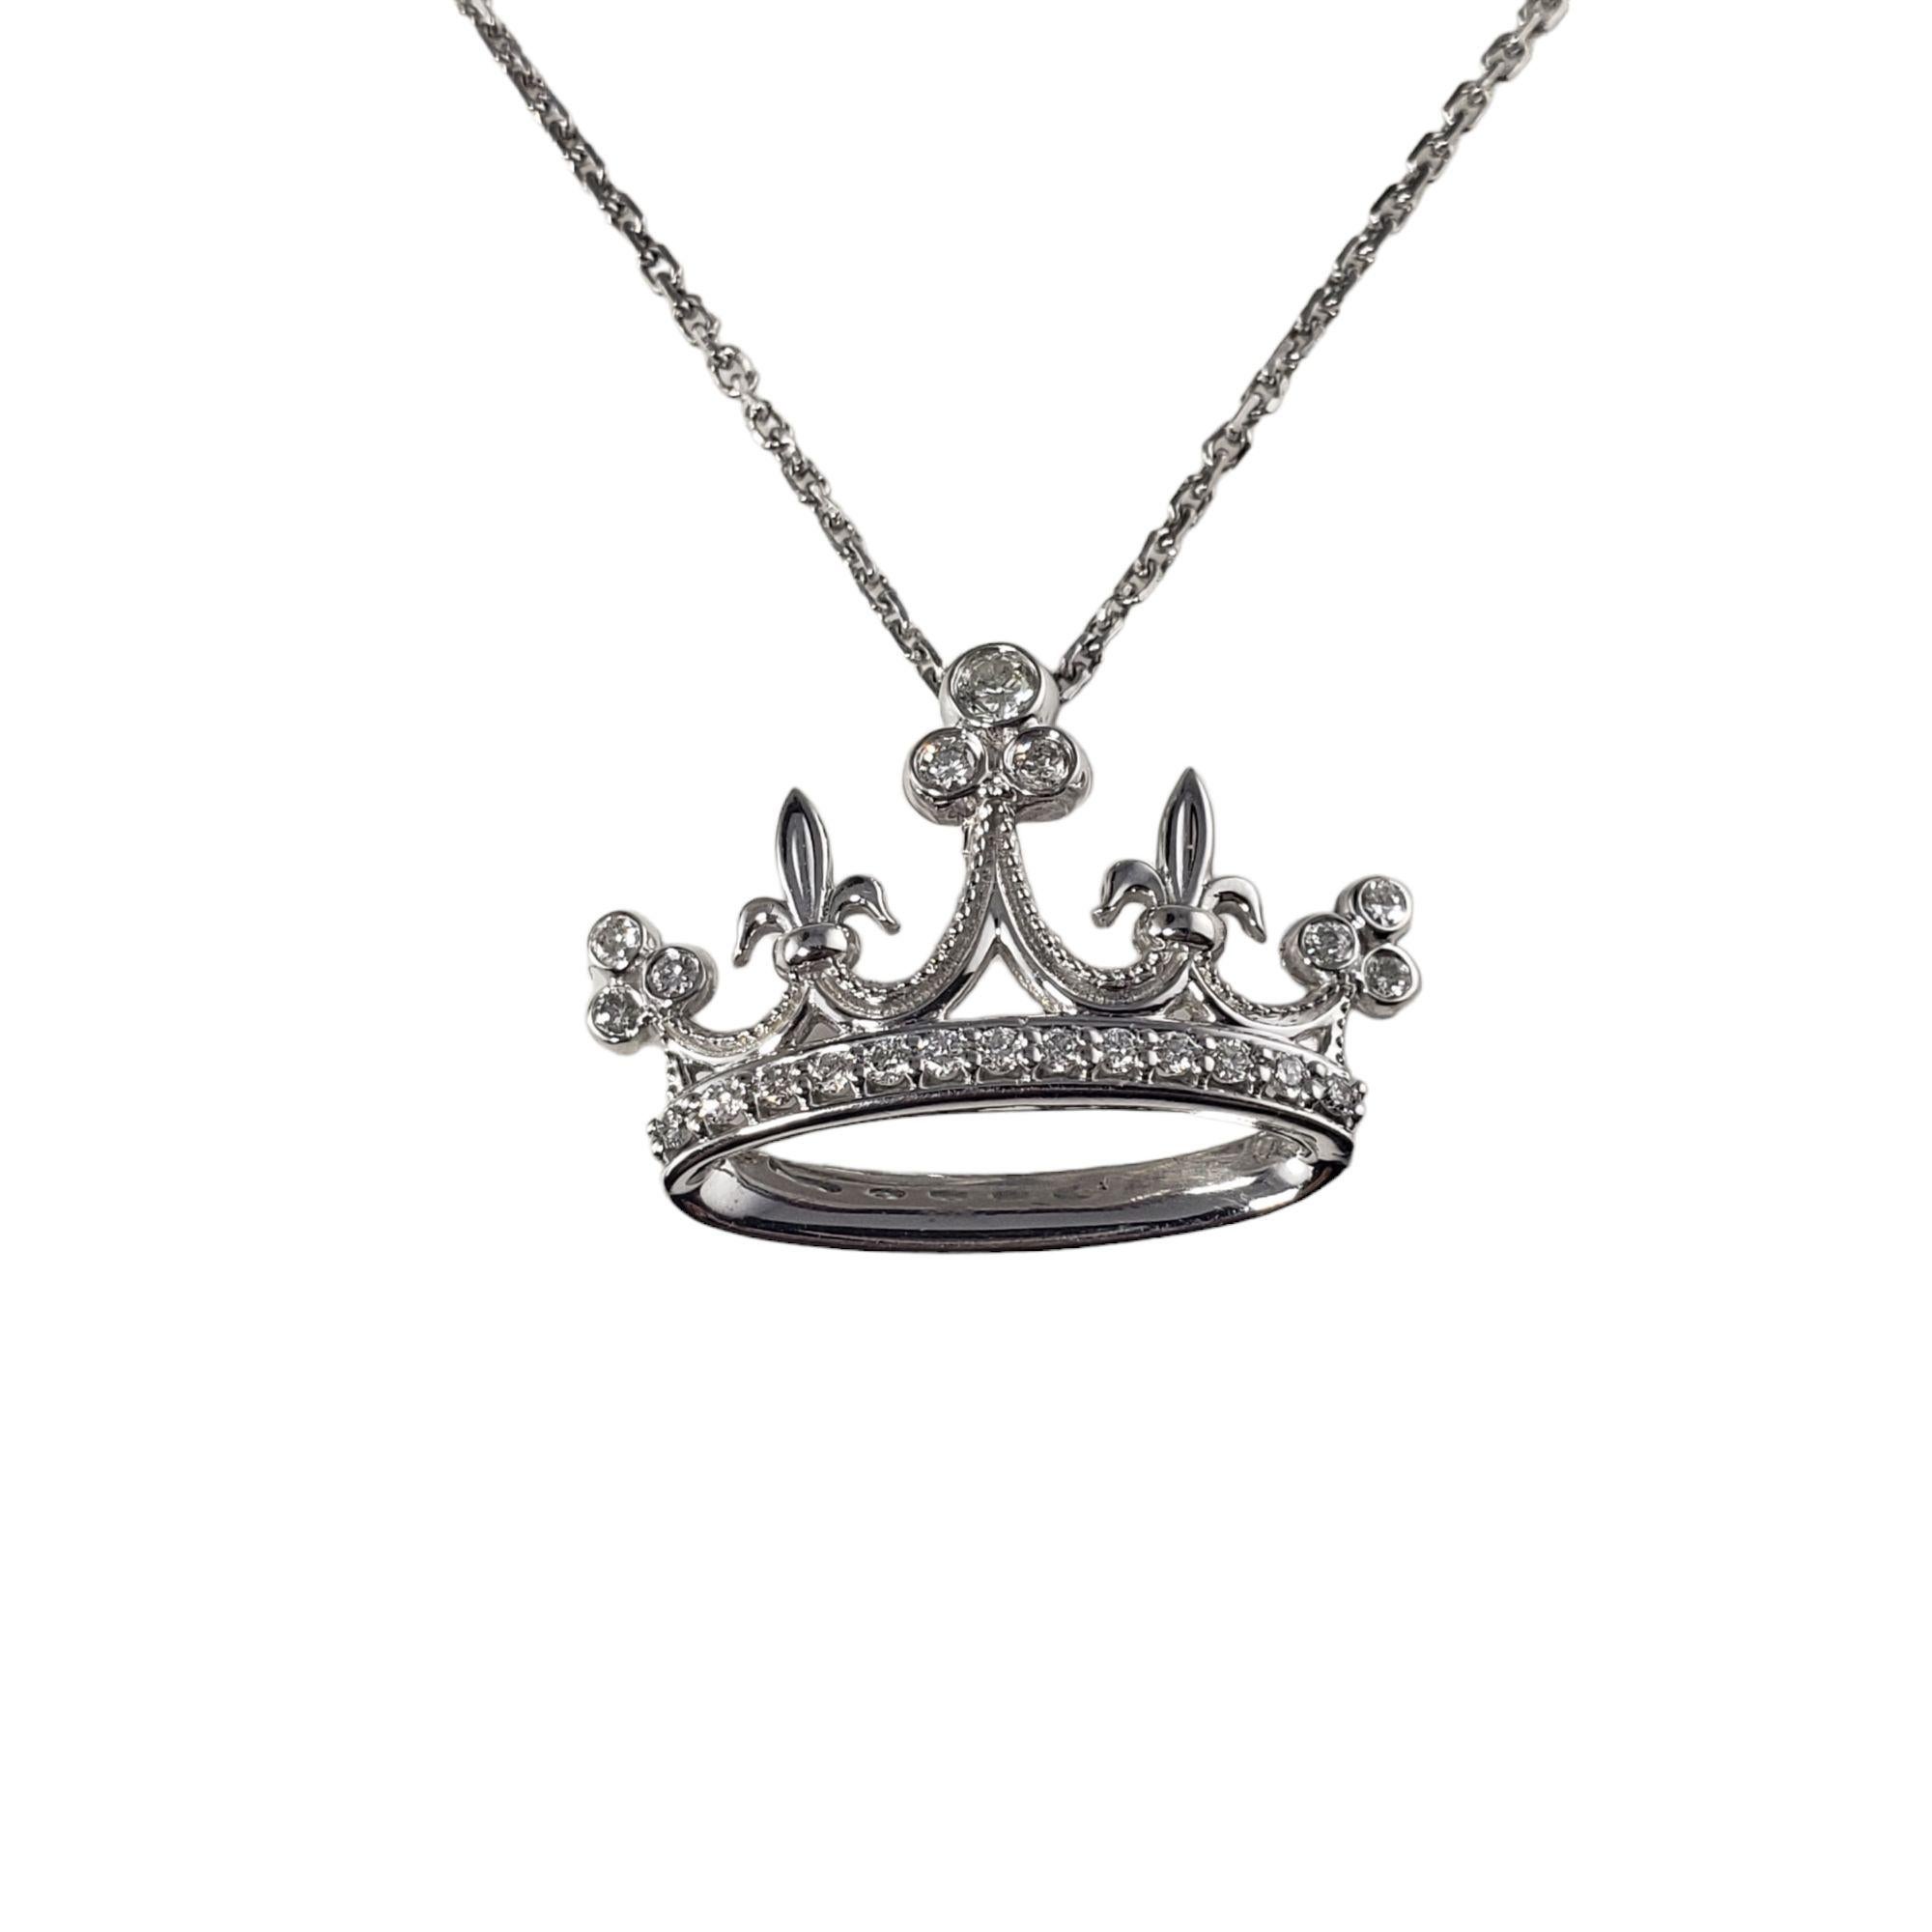 Vintage 14 Karat White Gold and Diamond Crown Pendant Necklace-

This lovely crown pendant features 22 round brilliant cut diamonds set in classic 14K white gold. Suspends from a classic 14K white gold chain.

Approximate total diamond weight: .25